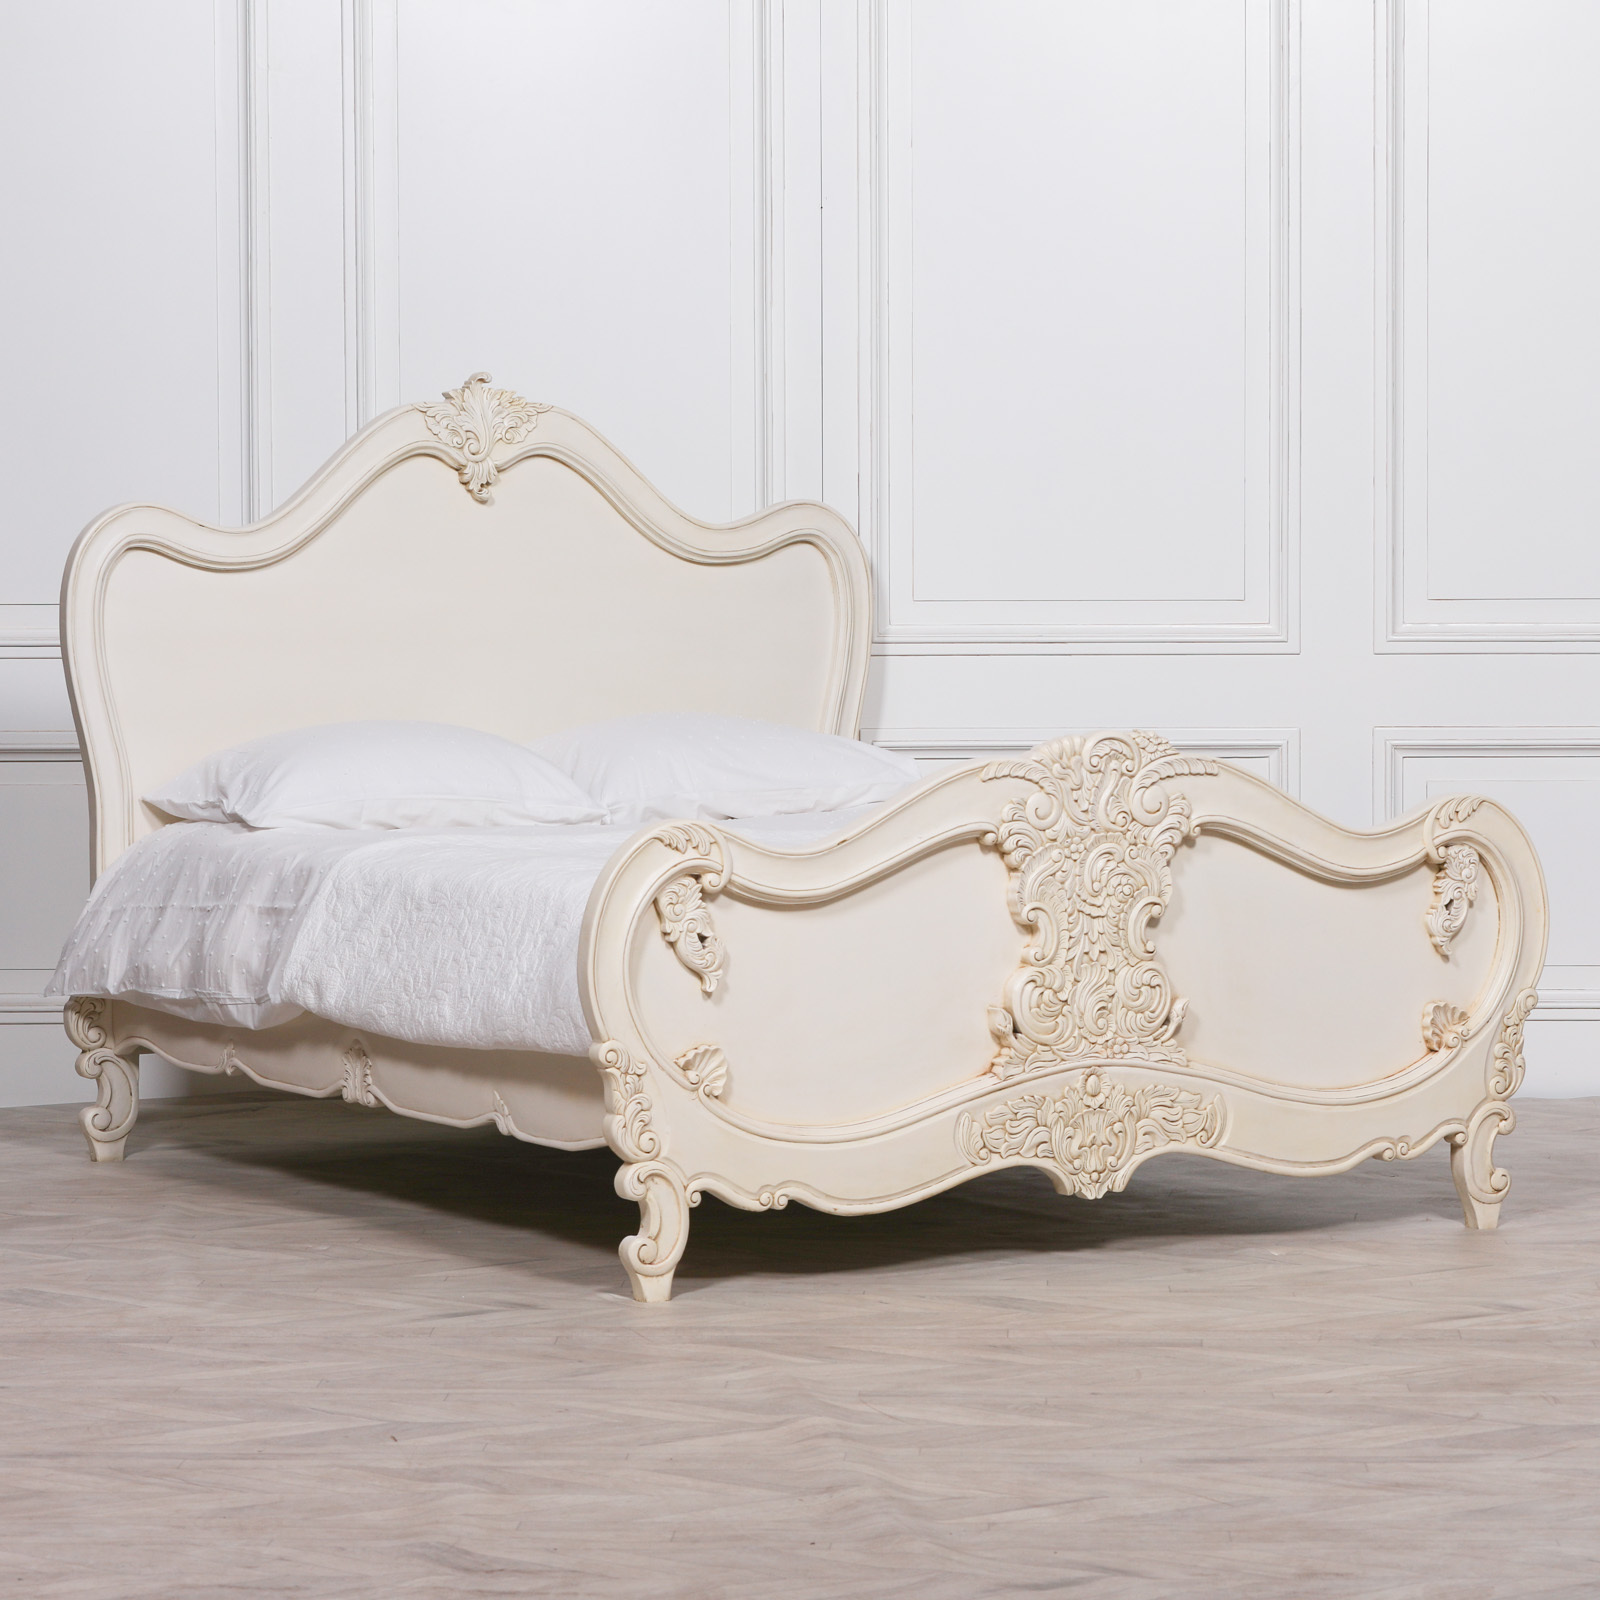 The Elegance Of French Furniture: A Timeless Legacy